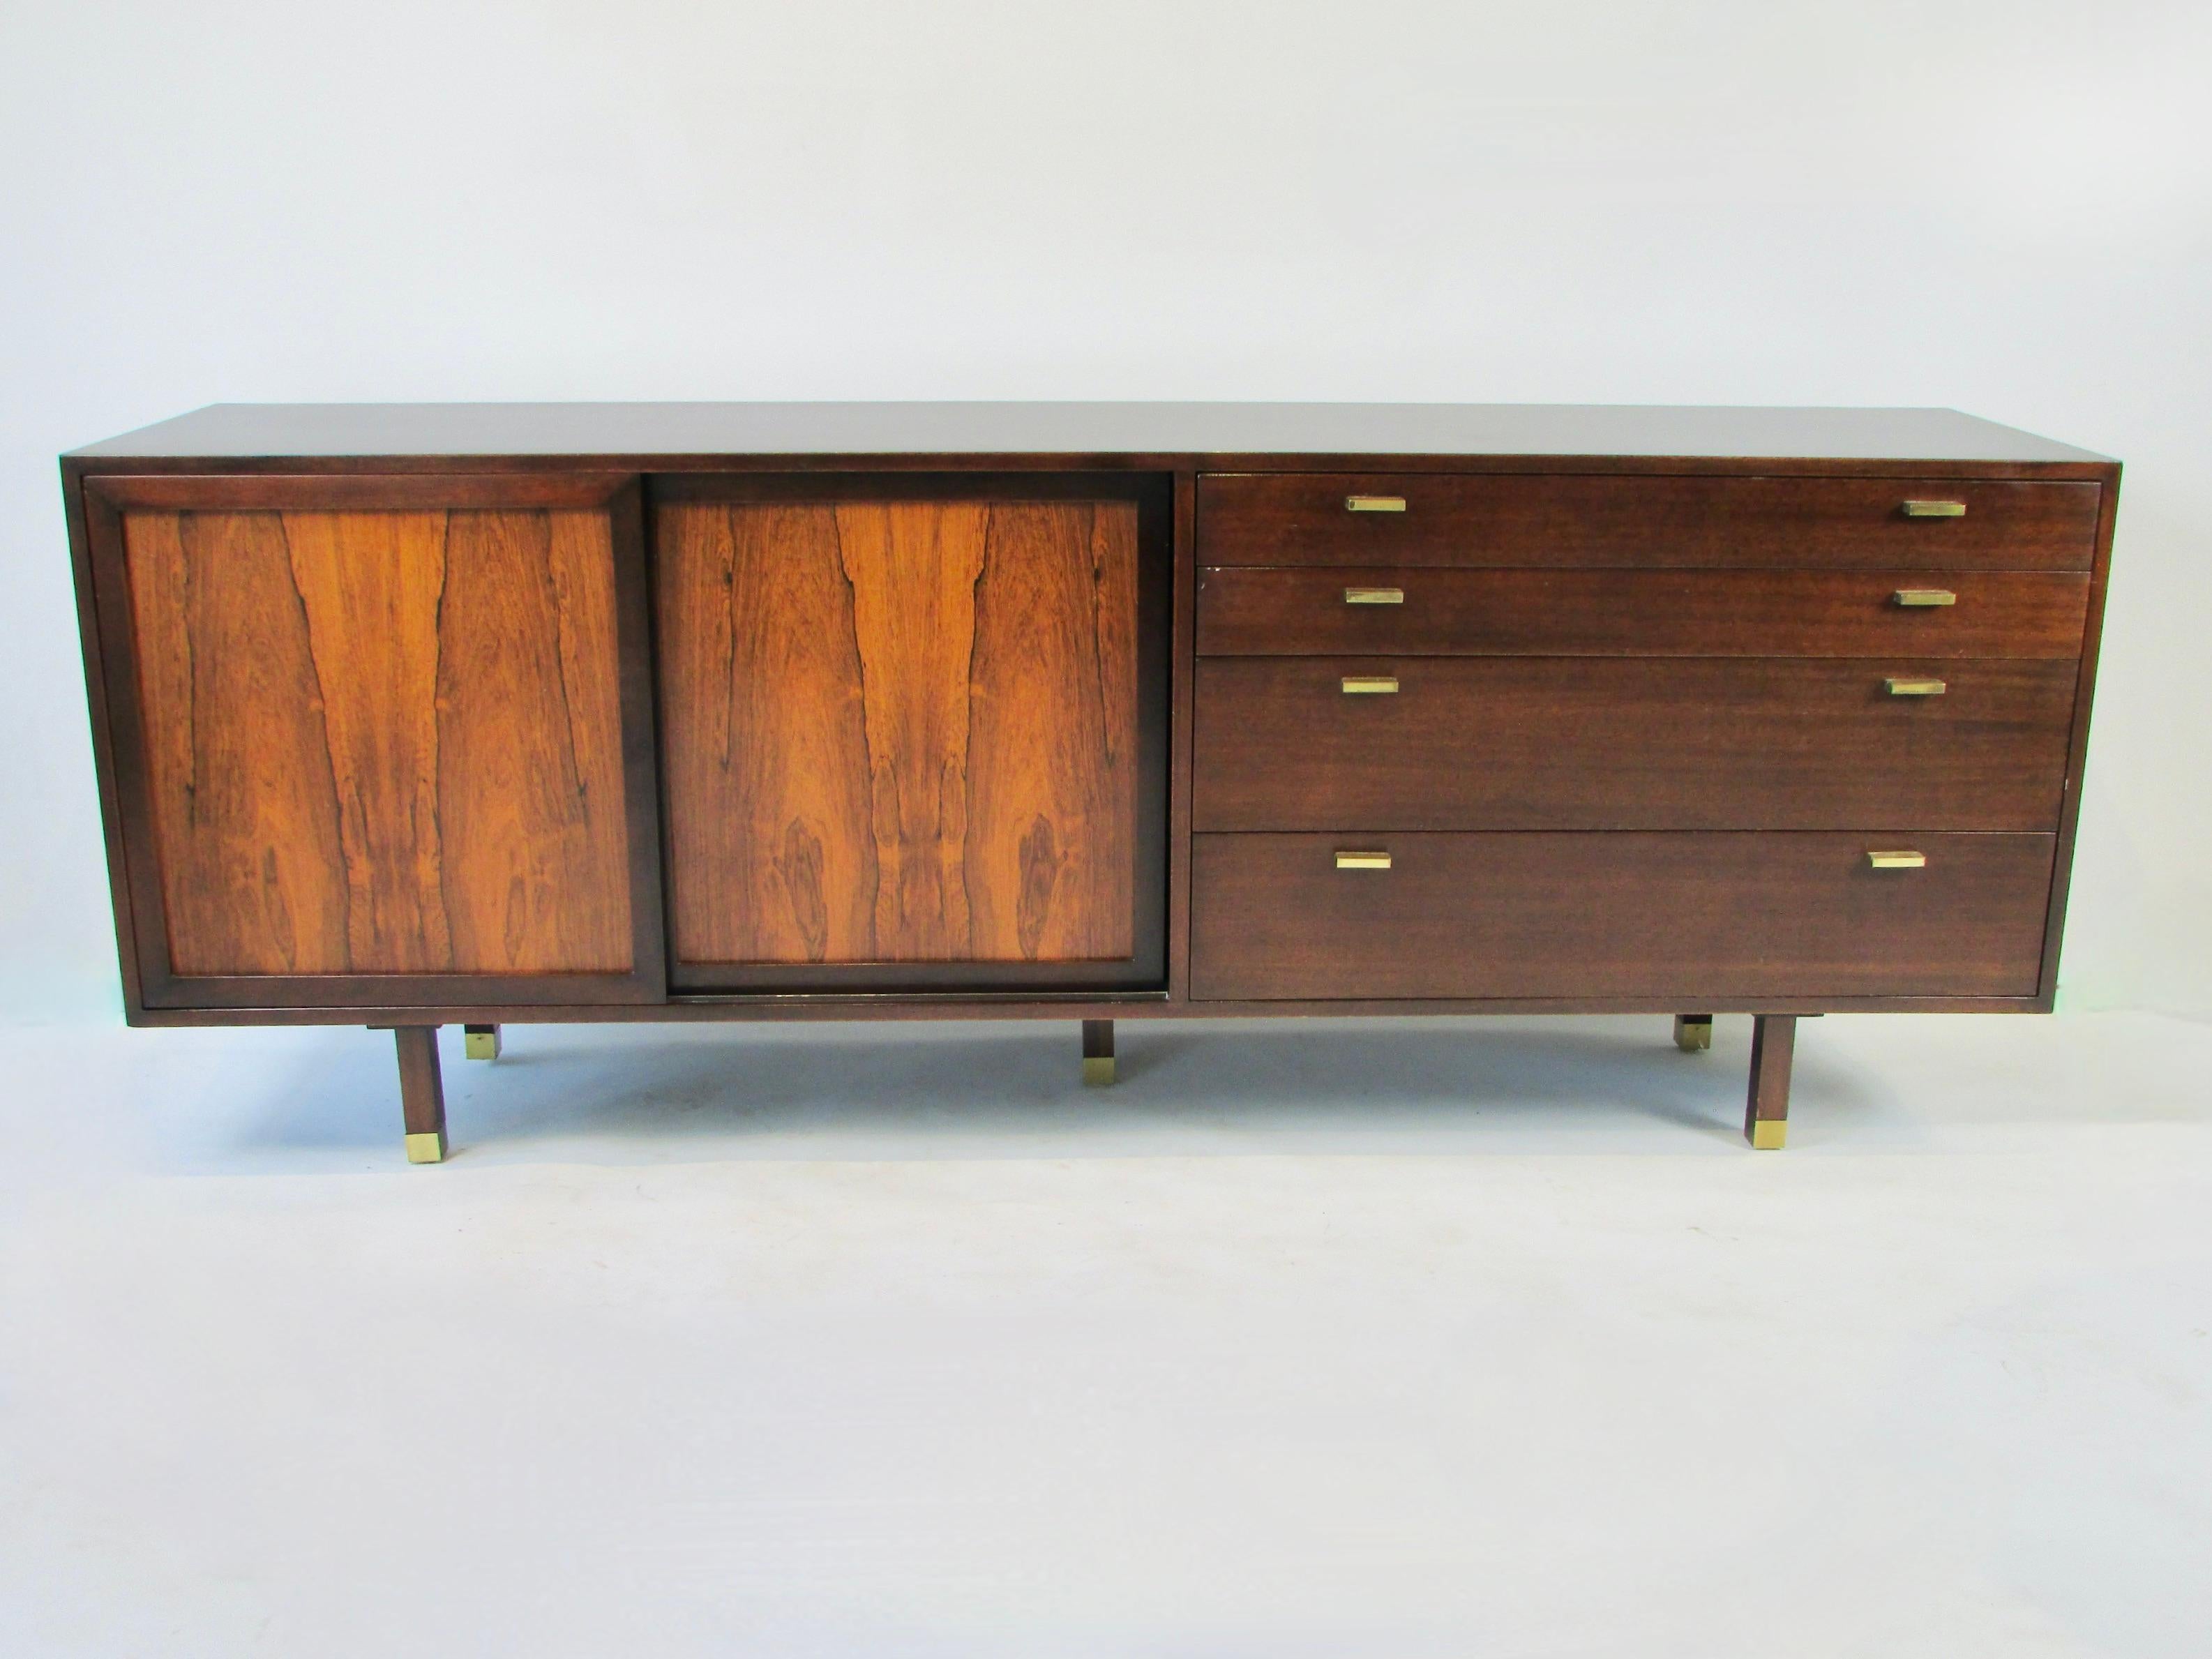 Large 6 foot five inch long mahogany cabinet housing two rosewood sliding doors alongside four graduated drawers. One door holds adjustable shelves second door slides open to reveal pair of cork lined drawers. Drawers of the credenza open with solid